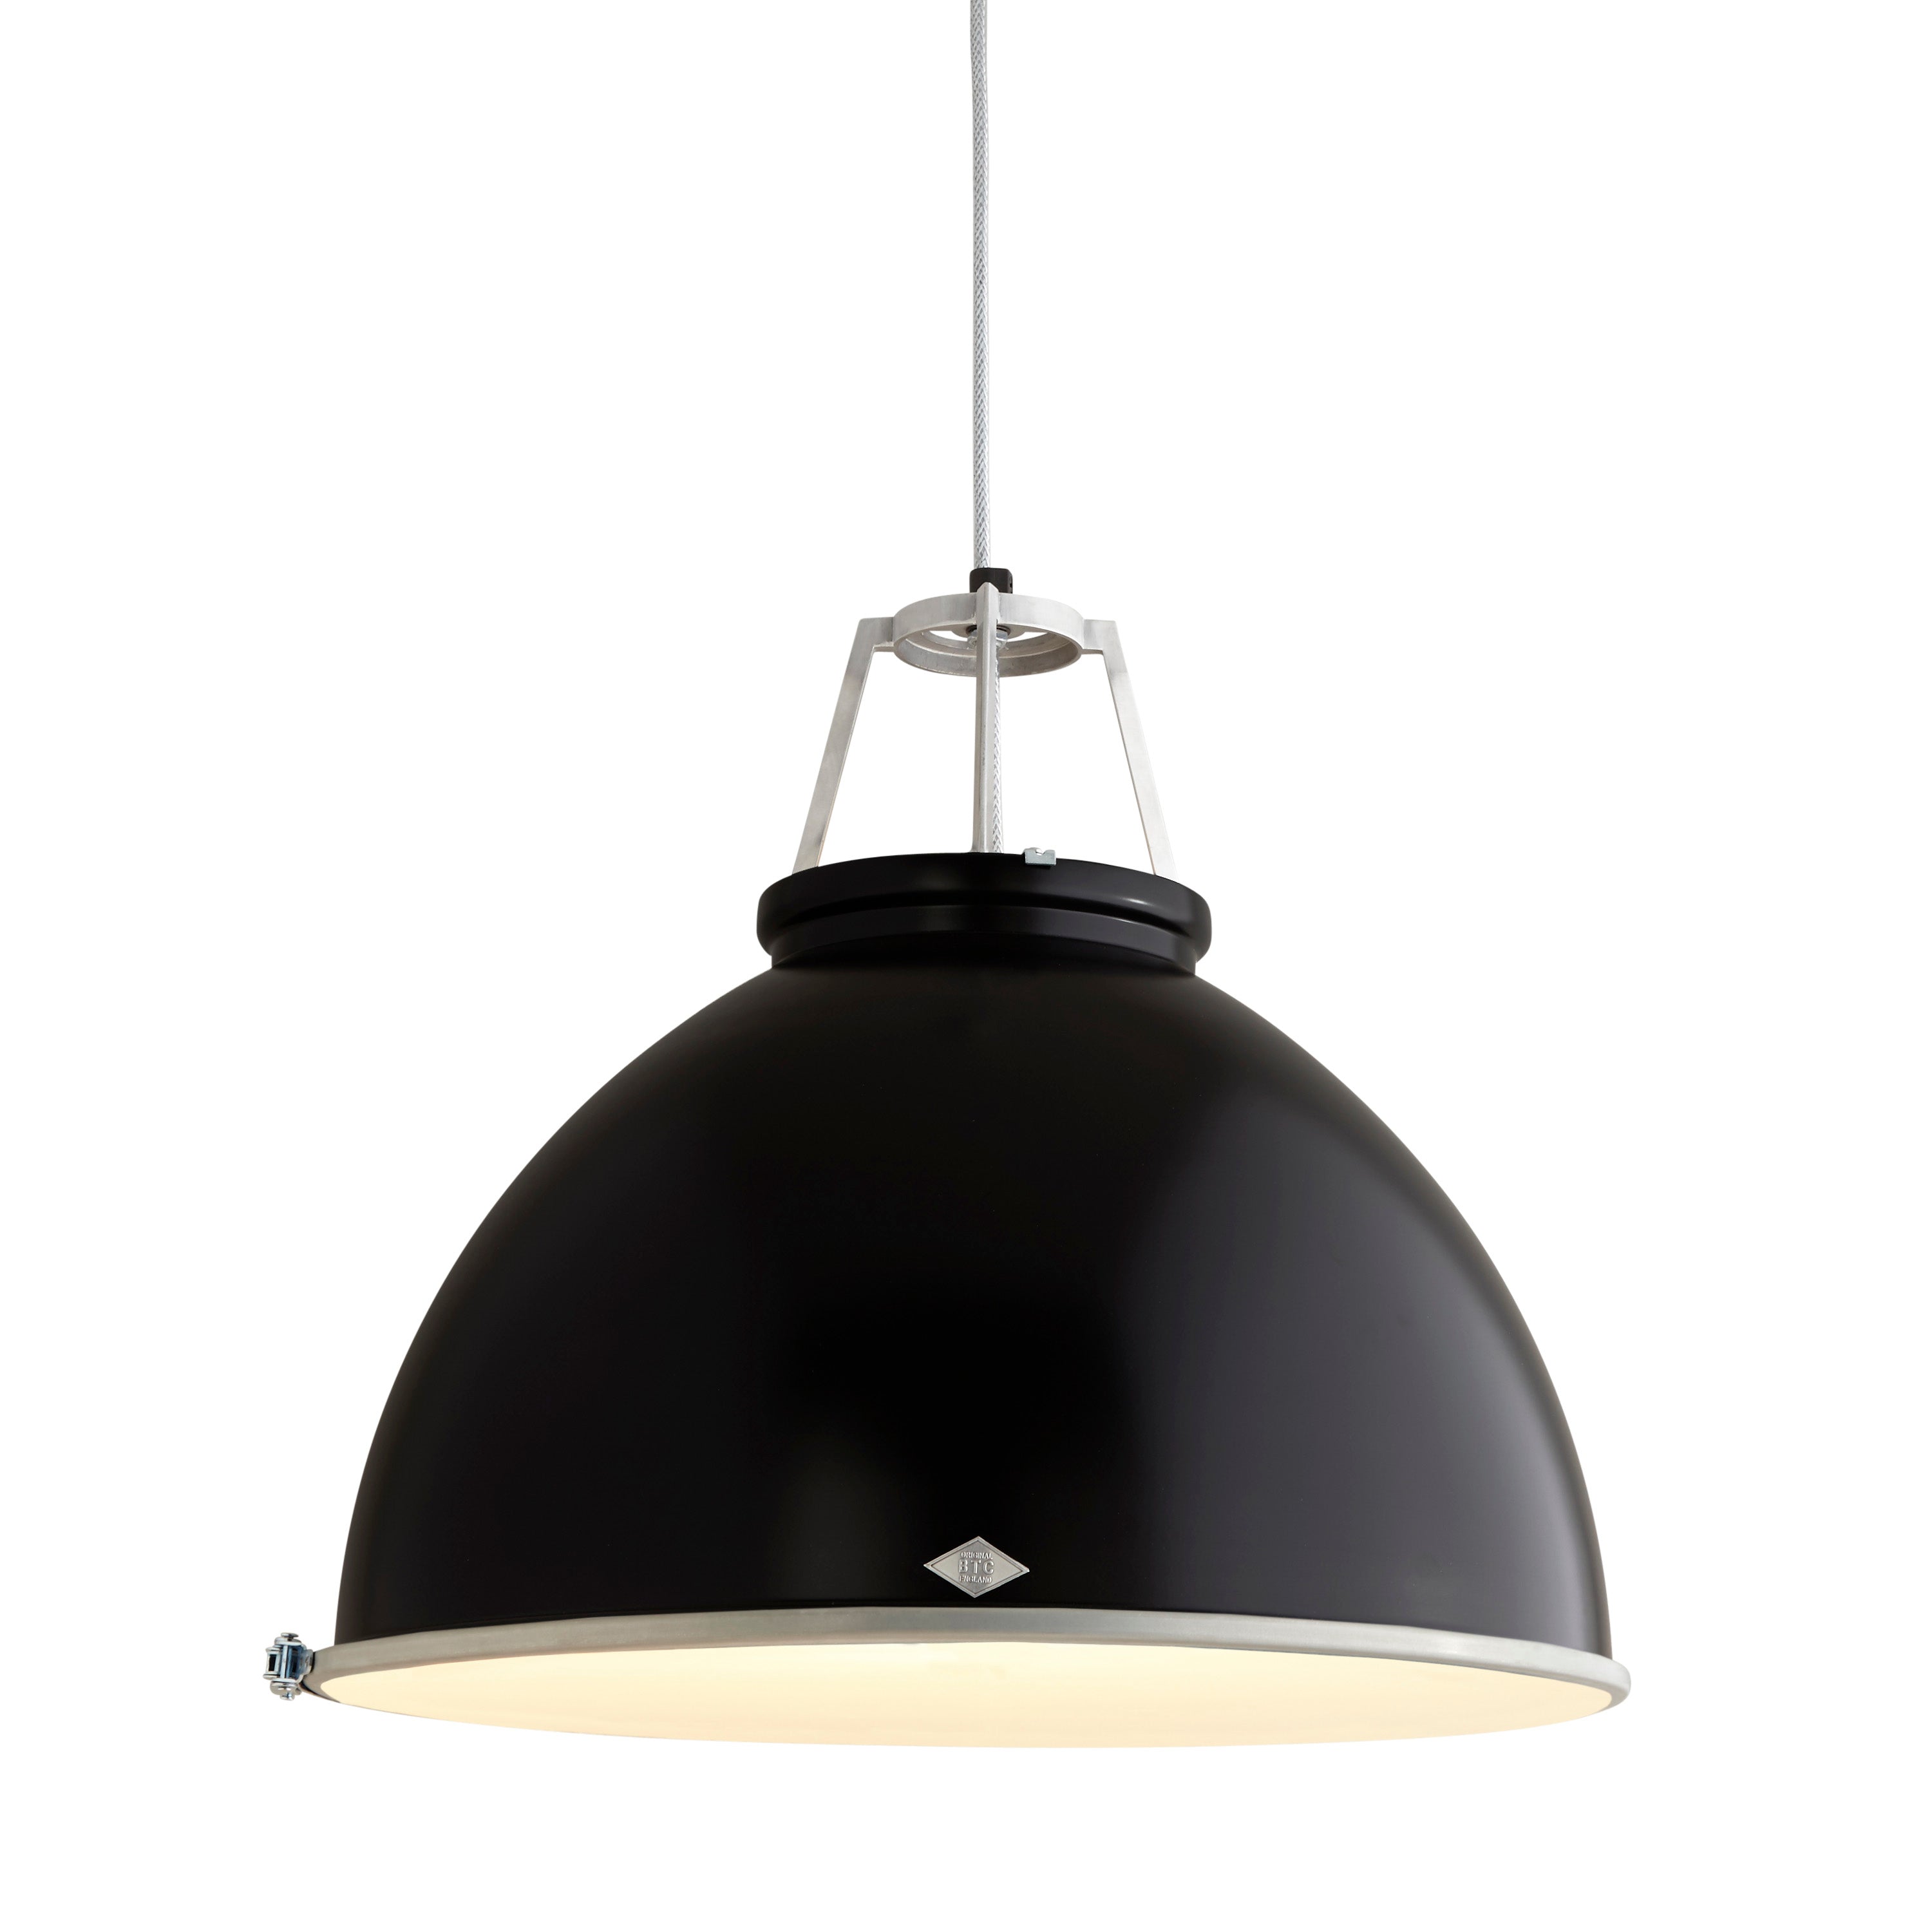 Original BTC Titan Size 5 pendant light in glossy black with etched glass from Warehouse Home